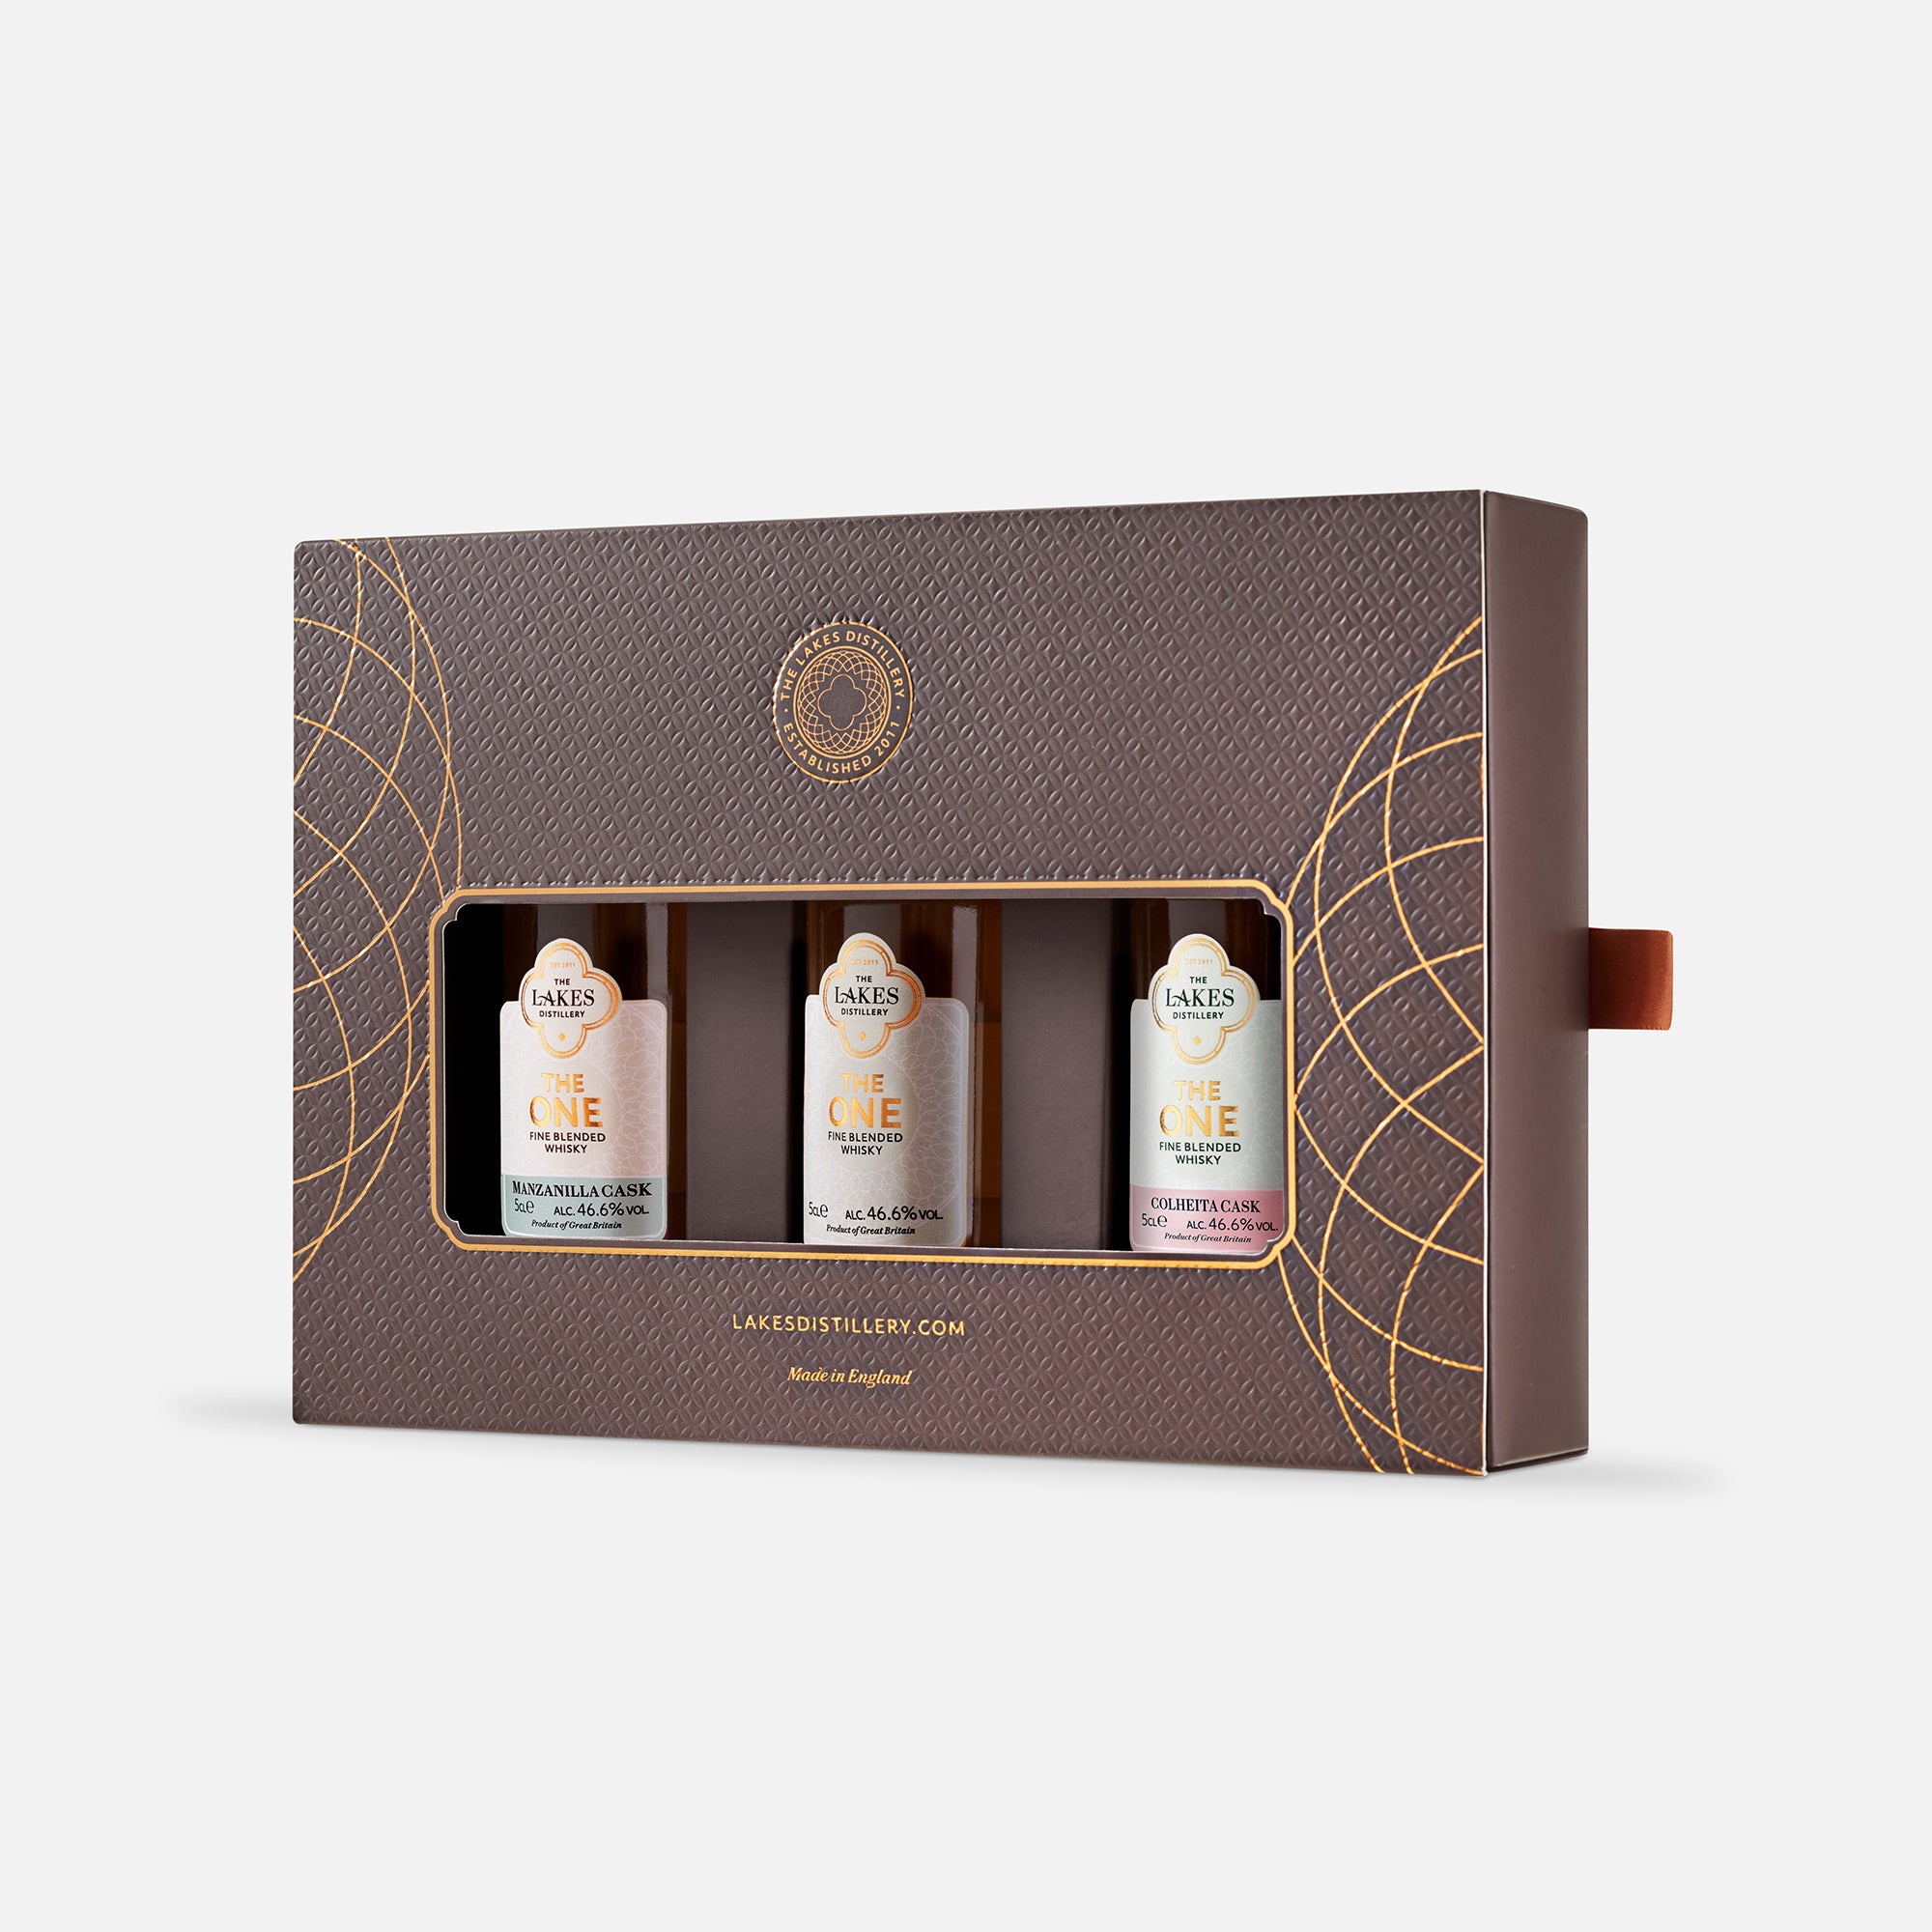 Miniature Whisky Tasting Packs And Gift Sets To Buy Online – The Really  Good Whisky Company